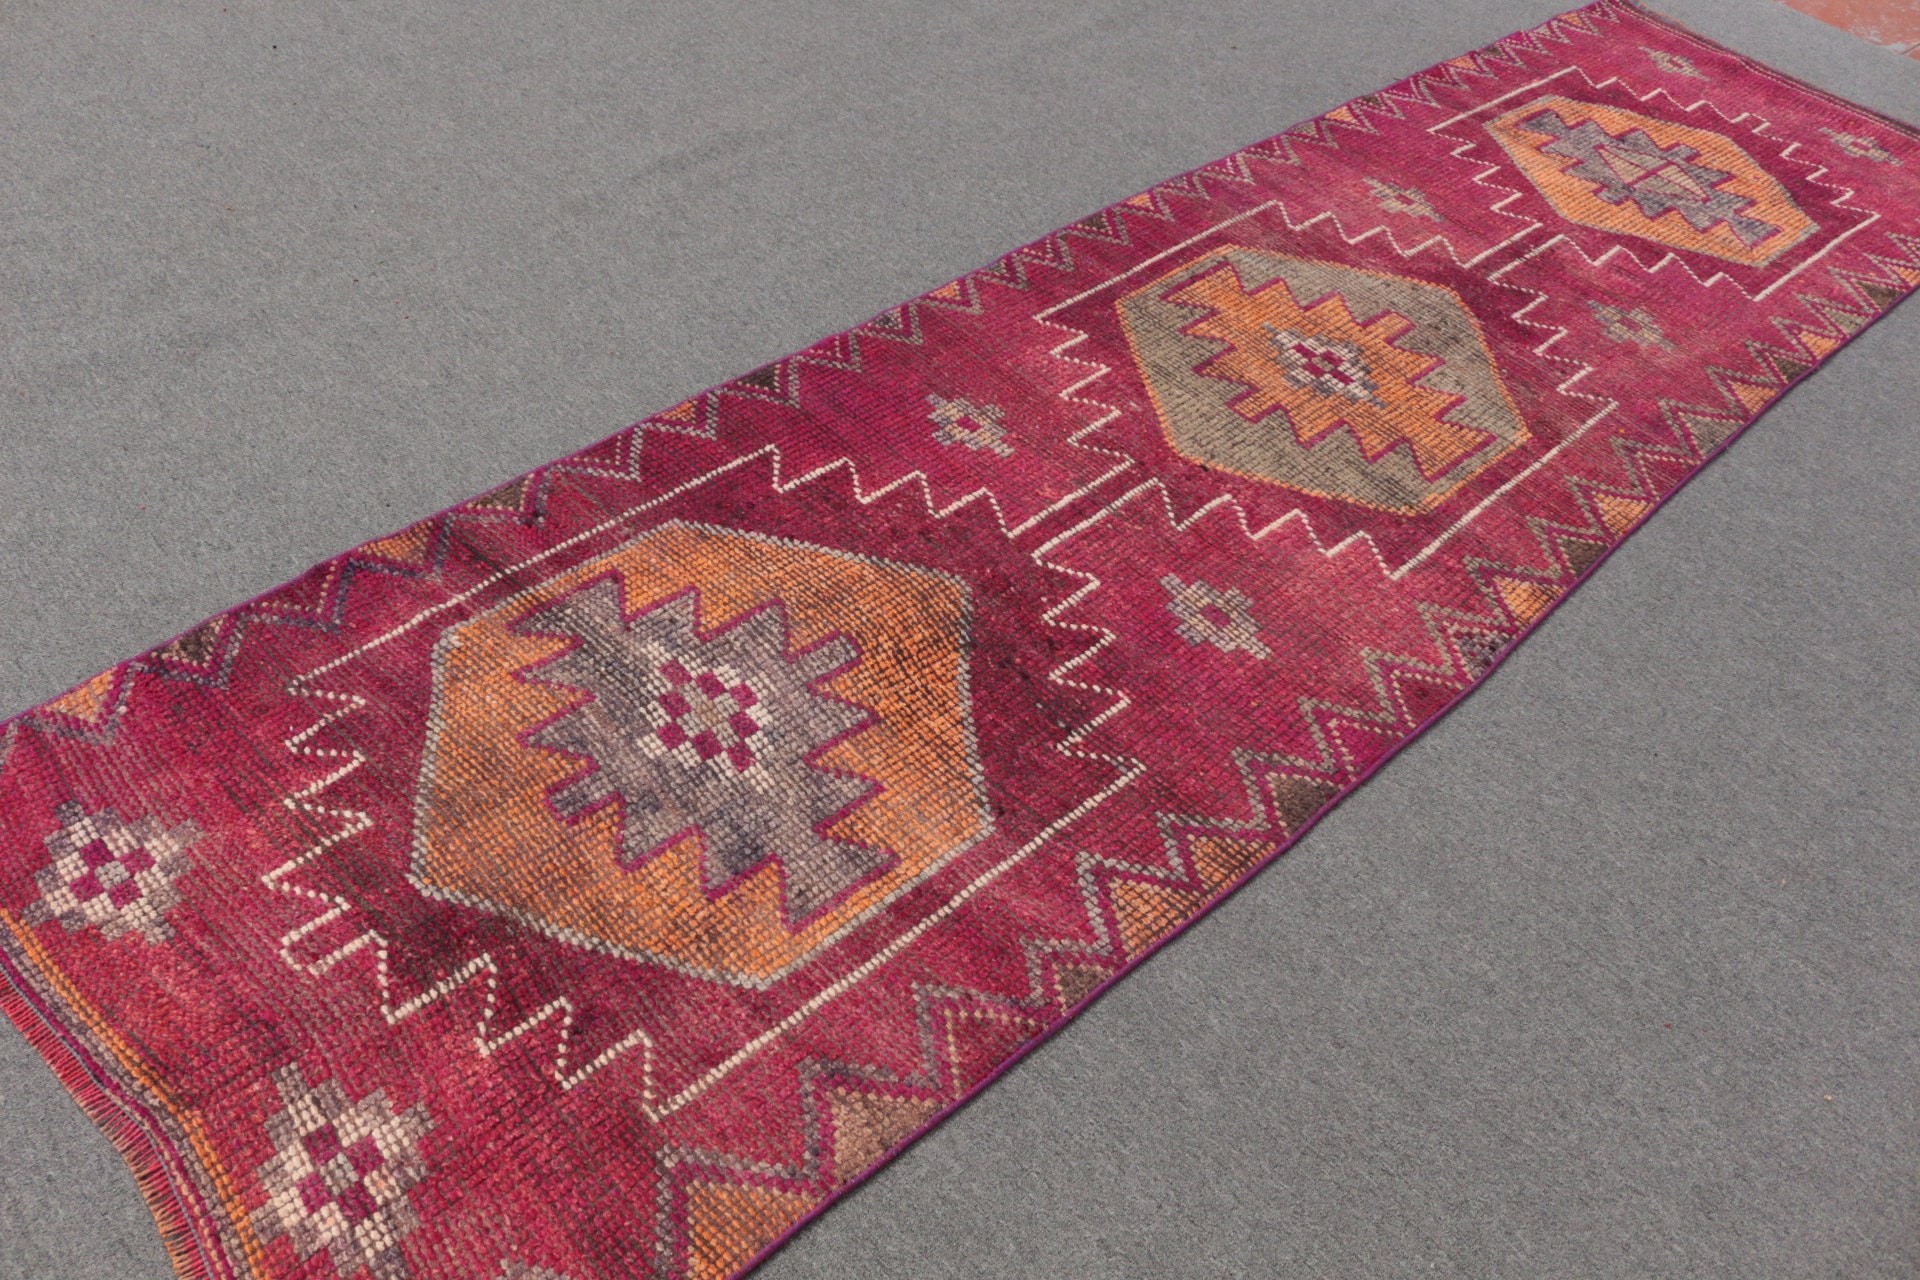 Rugs for Kitchen, Vintage Rugs, 3x11.3 ft Runner Rug, Eclectic Rug, Red Moroccan Rugs, Turkish Rug, Cool Rug, Antique Rugs, Corridor Rug